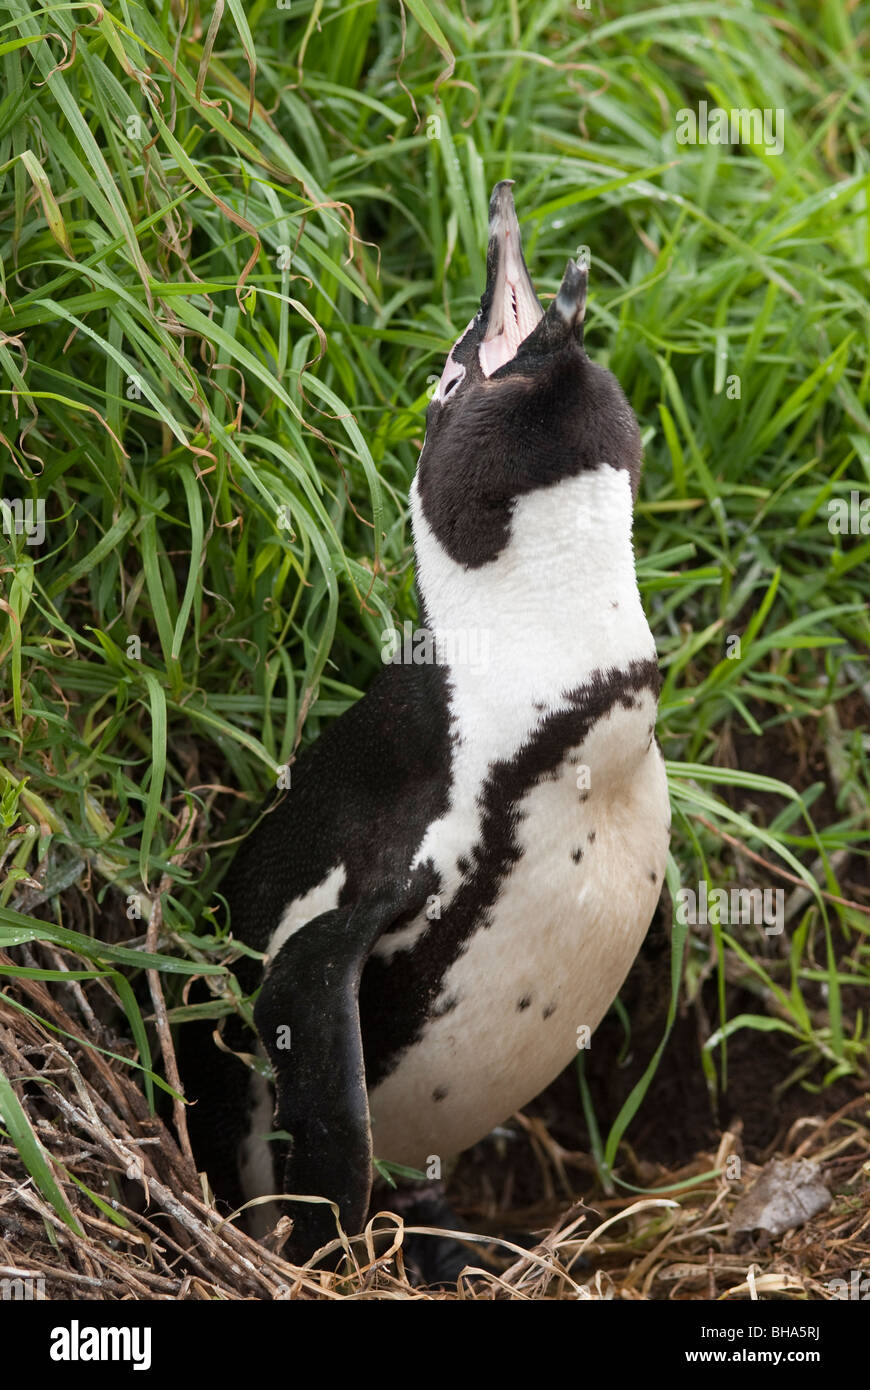 A nesting African penguin calling. Stock Photo